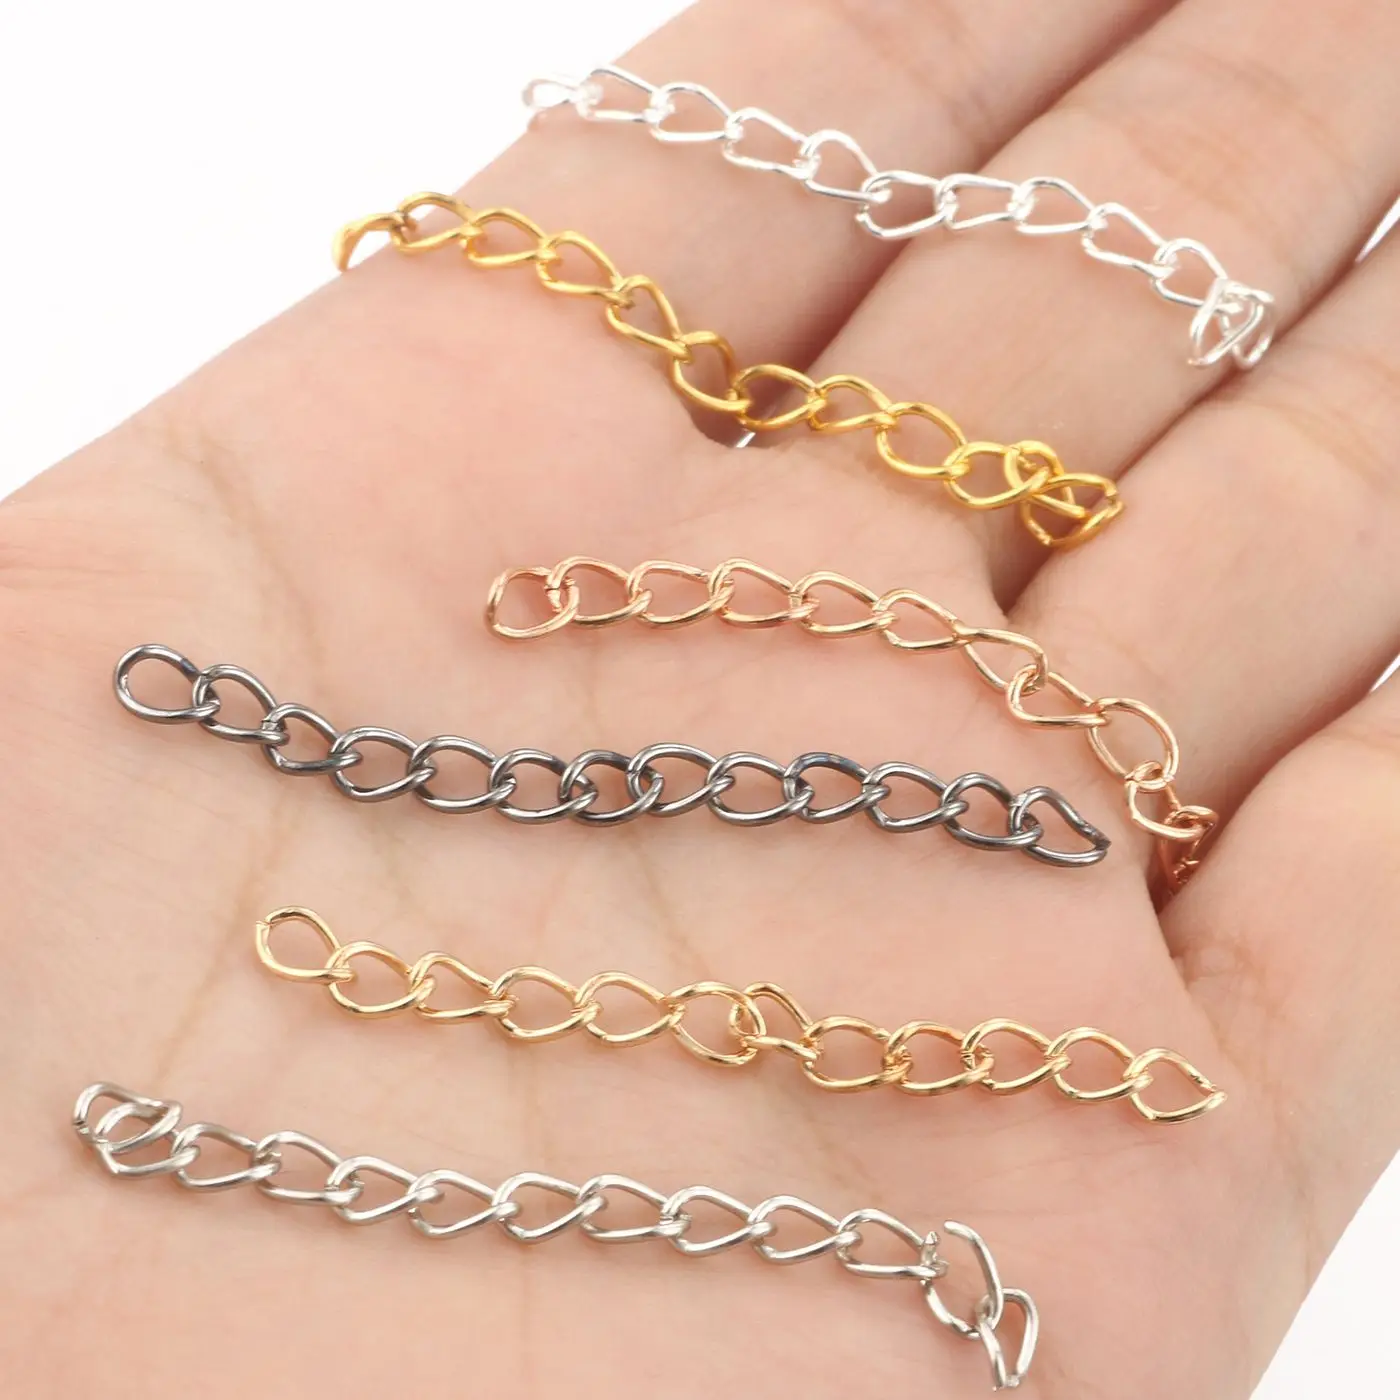 50pcs Stainless Steel 5cm Welded Extension Chain Gold Necklace